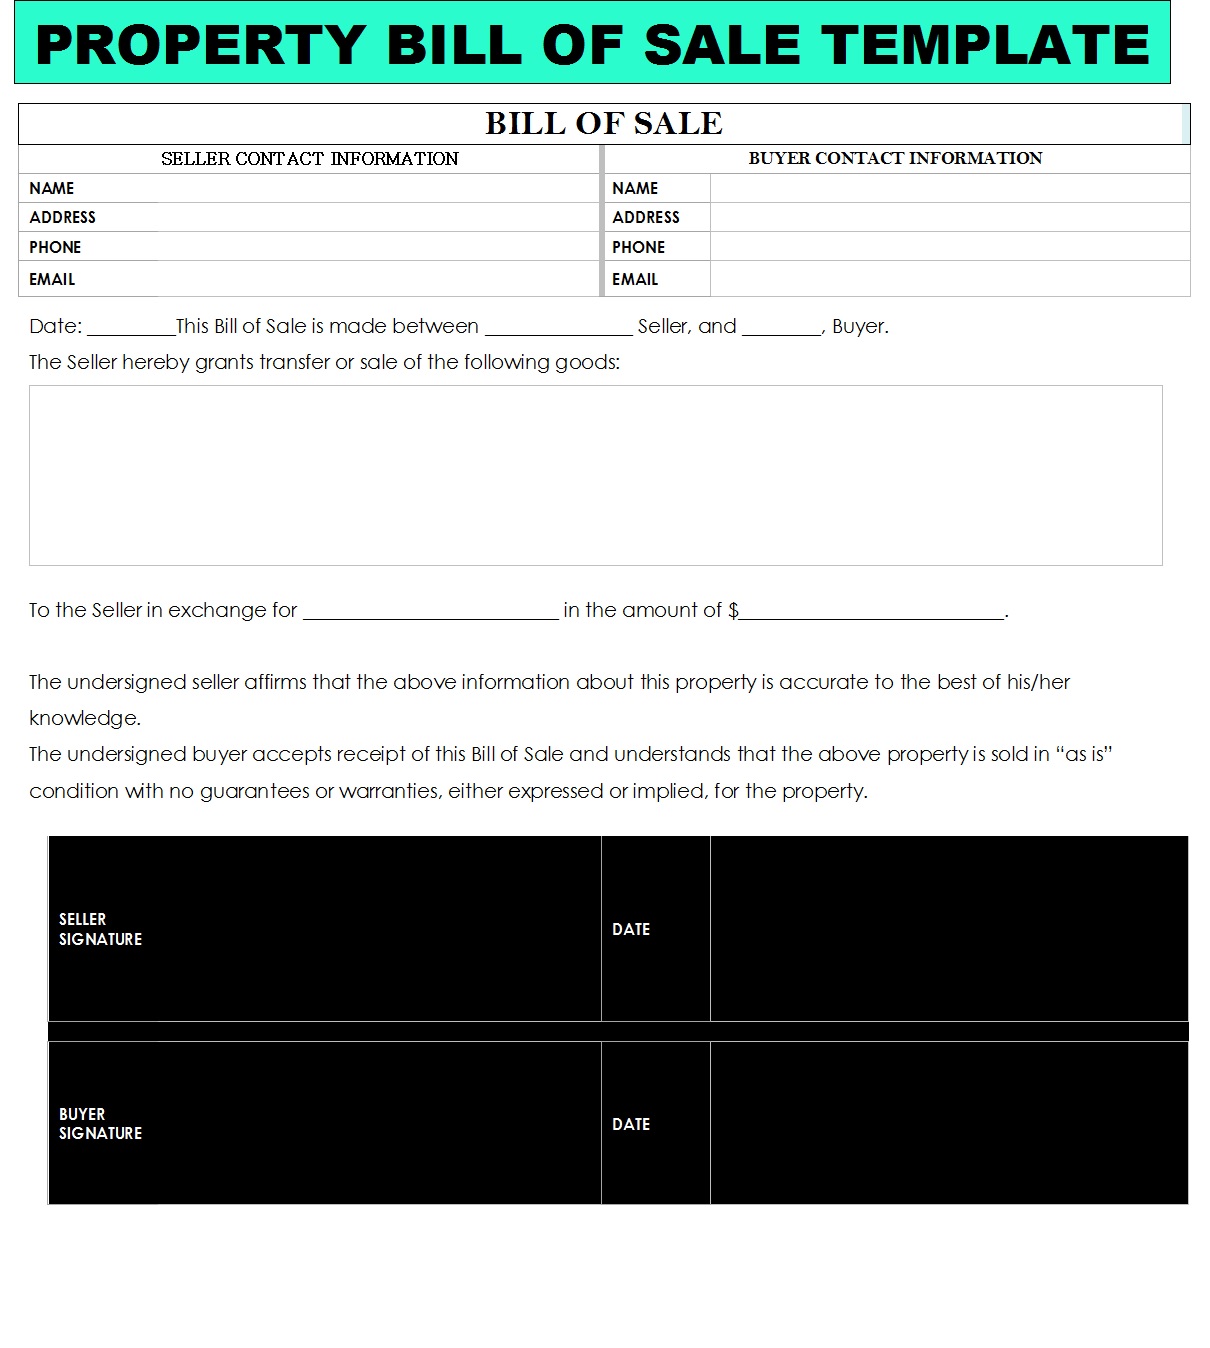 Property Bill Of Sale Templates